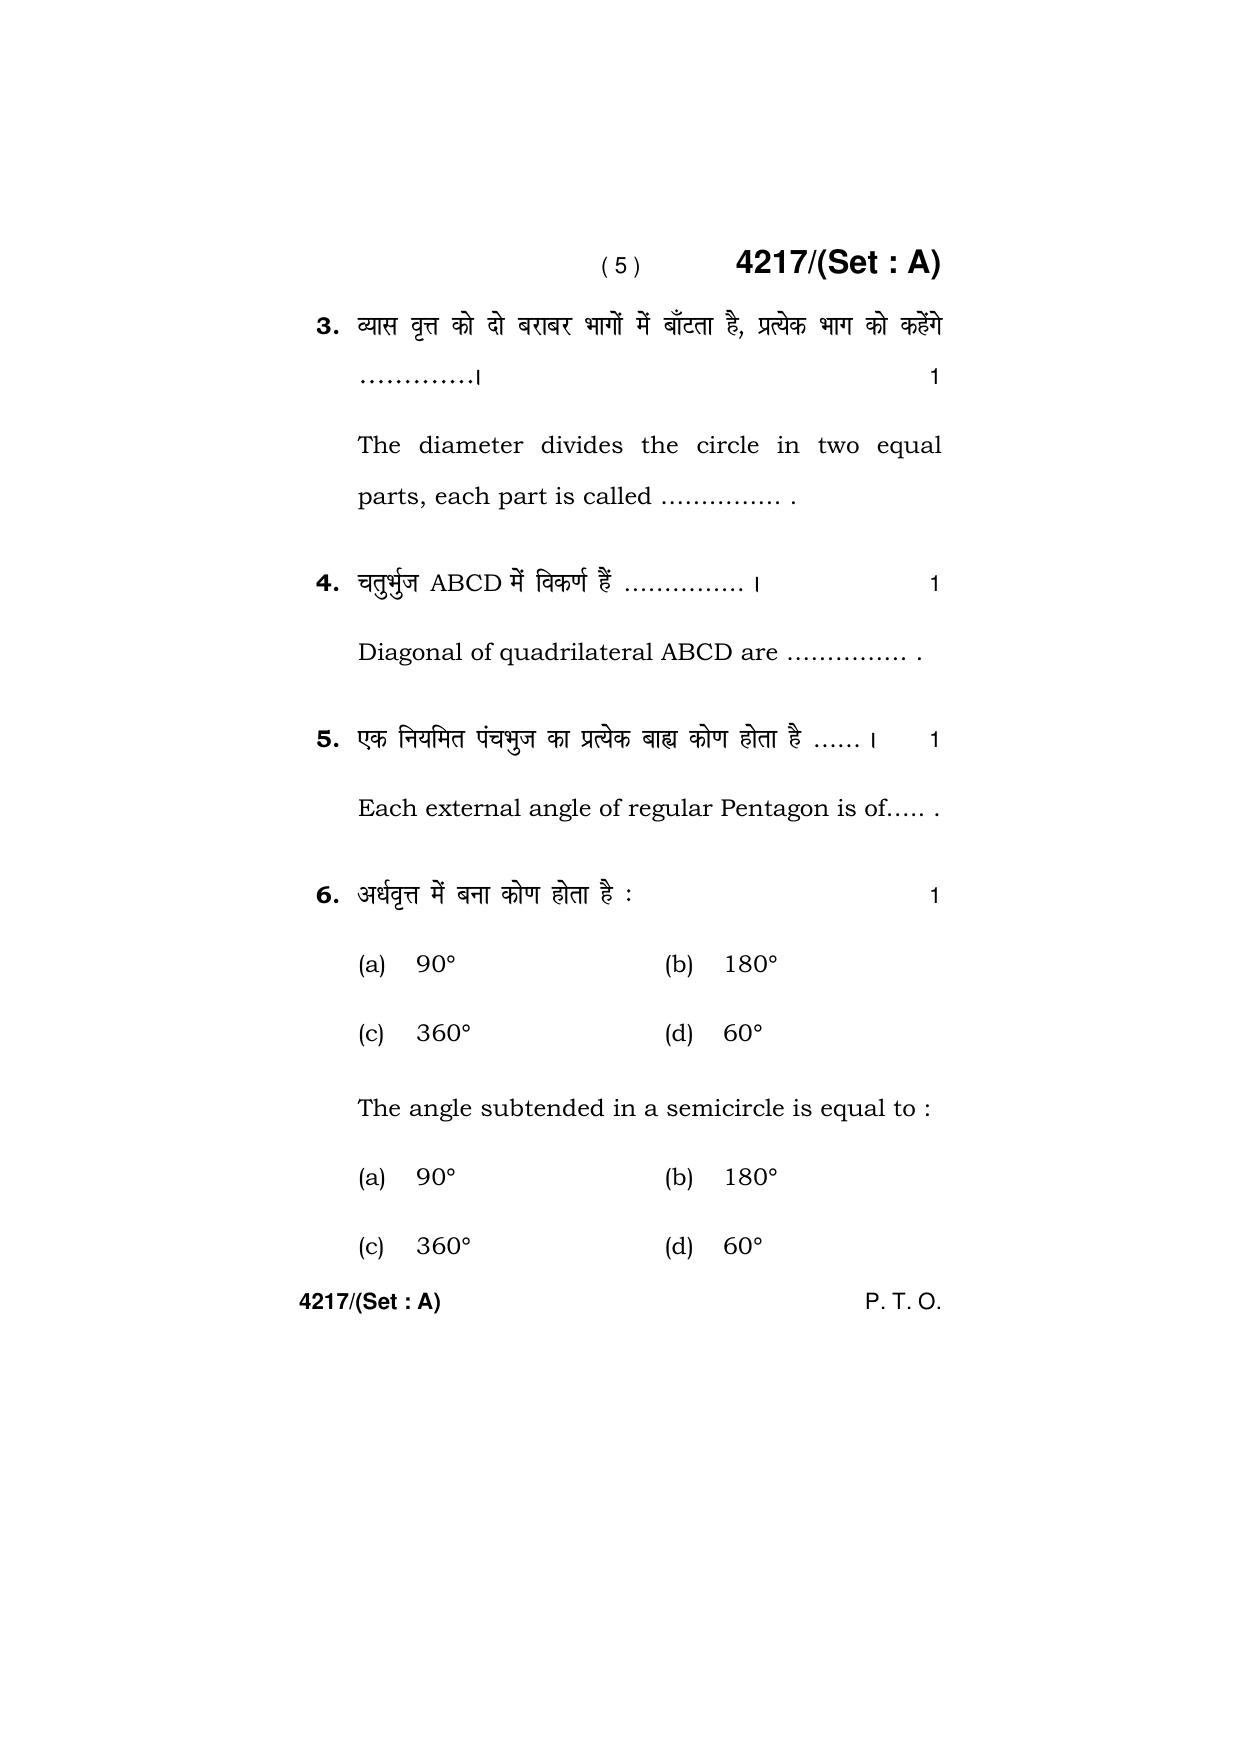 Haryana Board HBSE Class 10 Drawing (All Set) 2019 Question Paper - Page 5